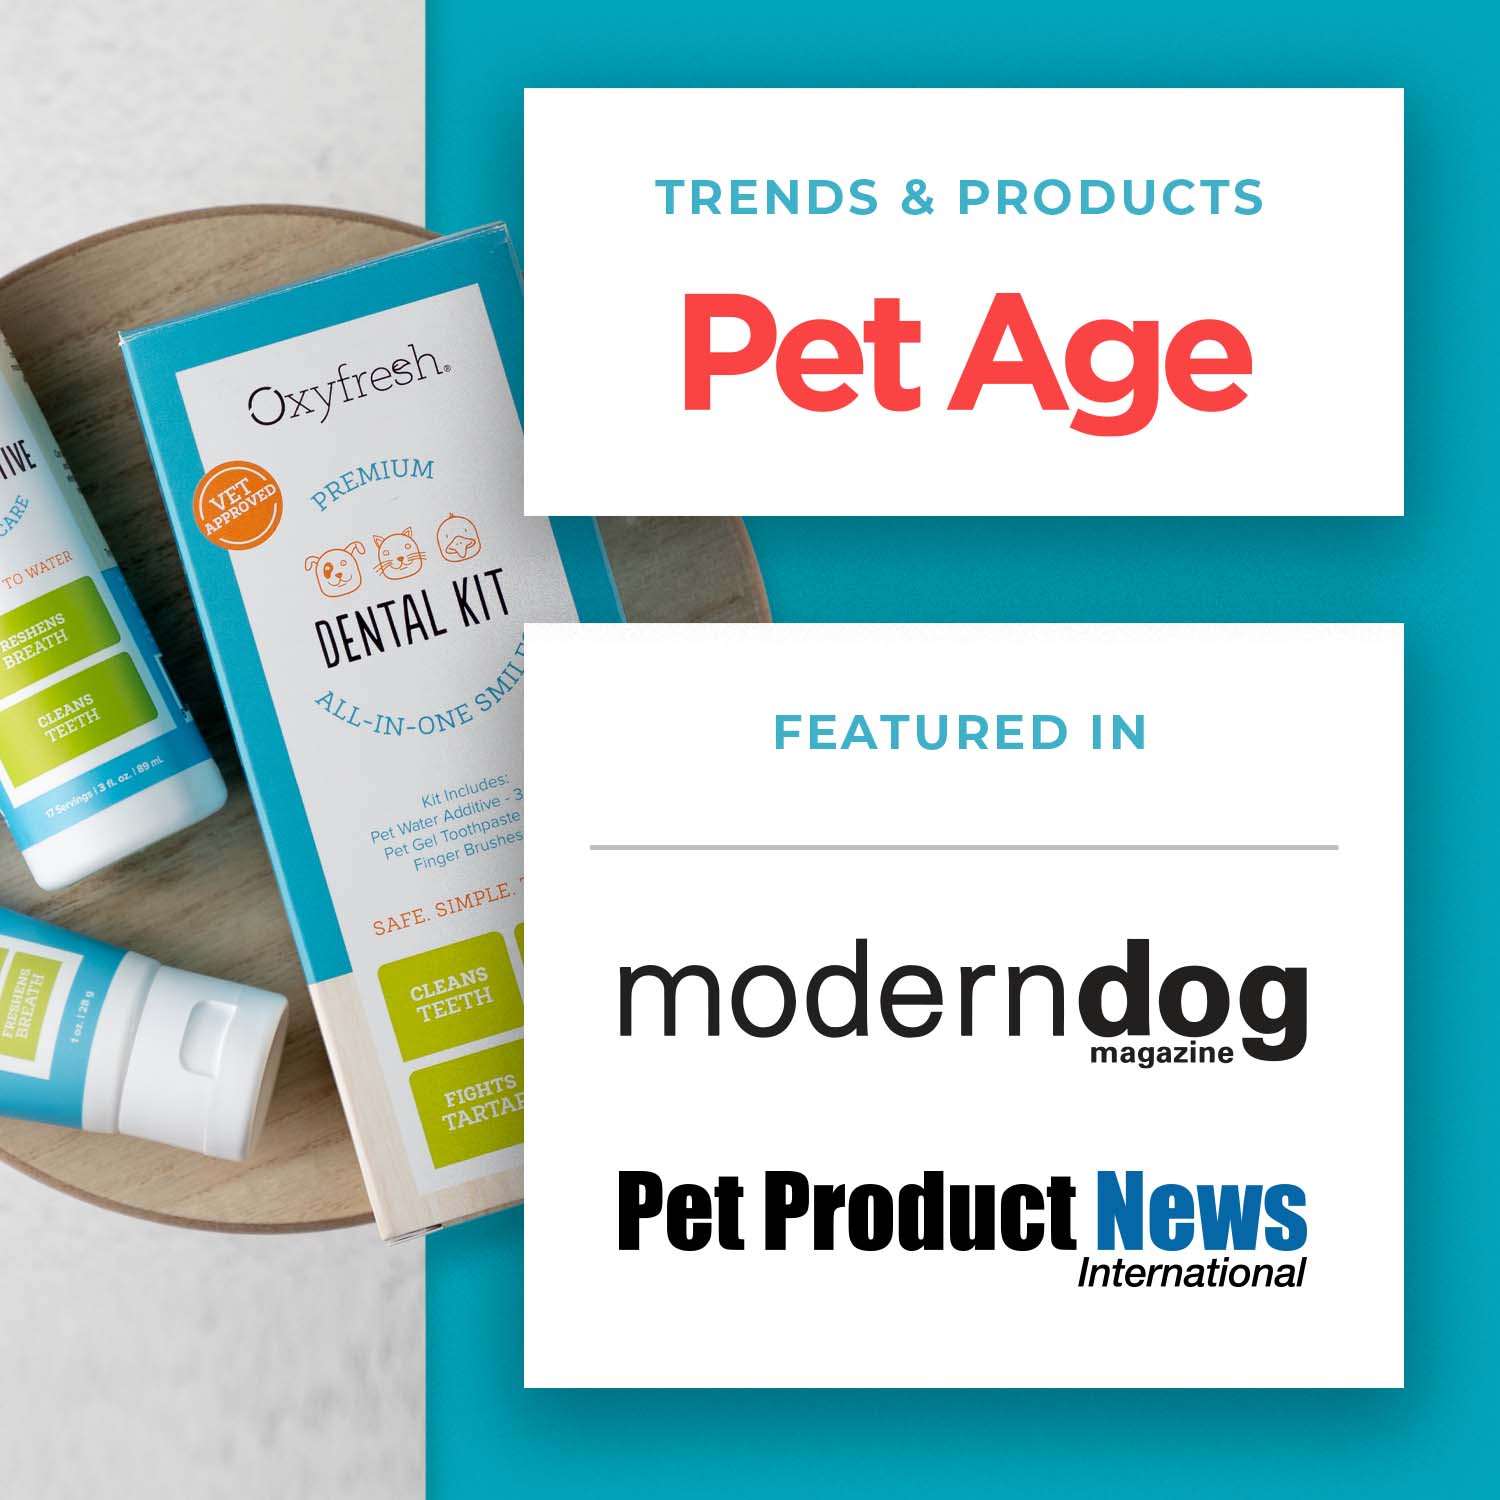 oxyfresh-pet-dental-kit-trends-and-products-in-PetAge-and-featured-in-moderndog-magazine-and-pet-product-news-international